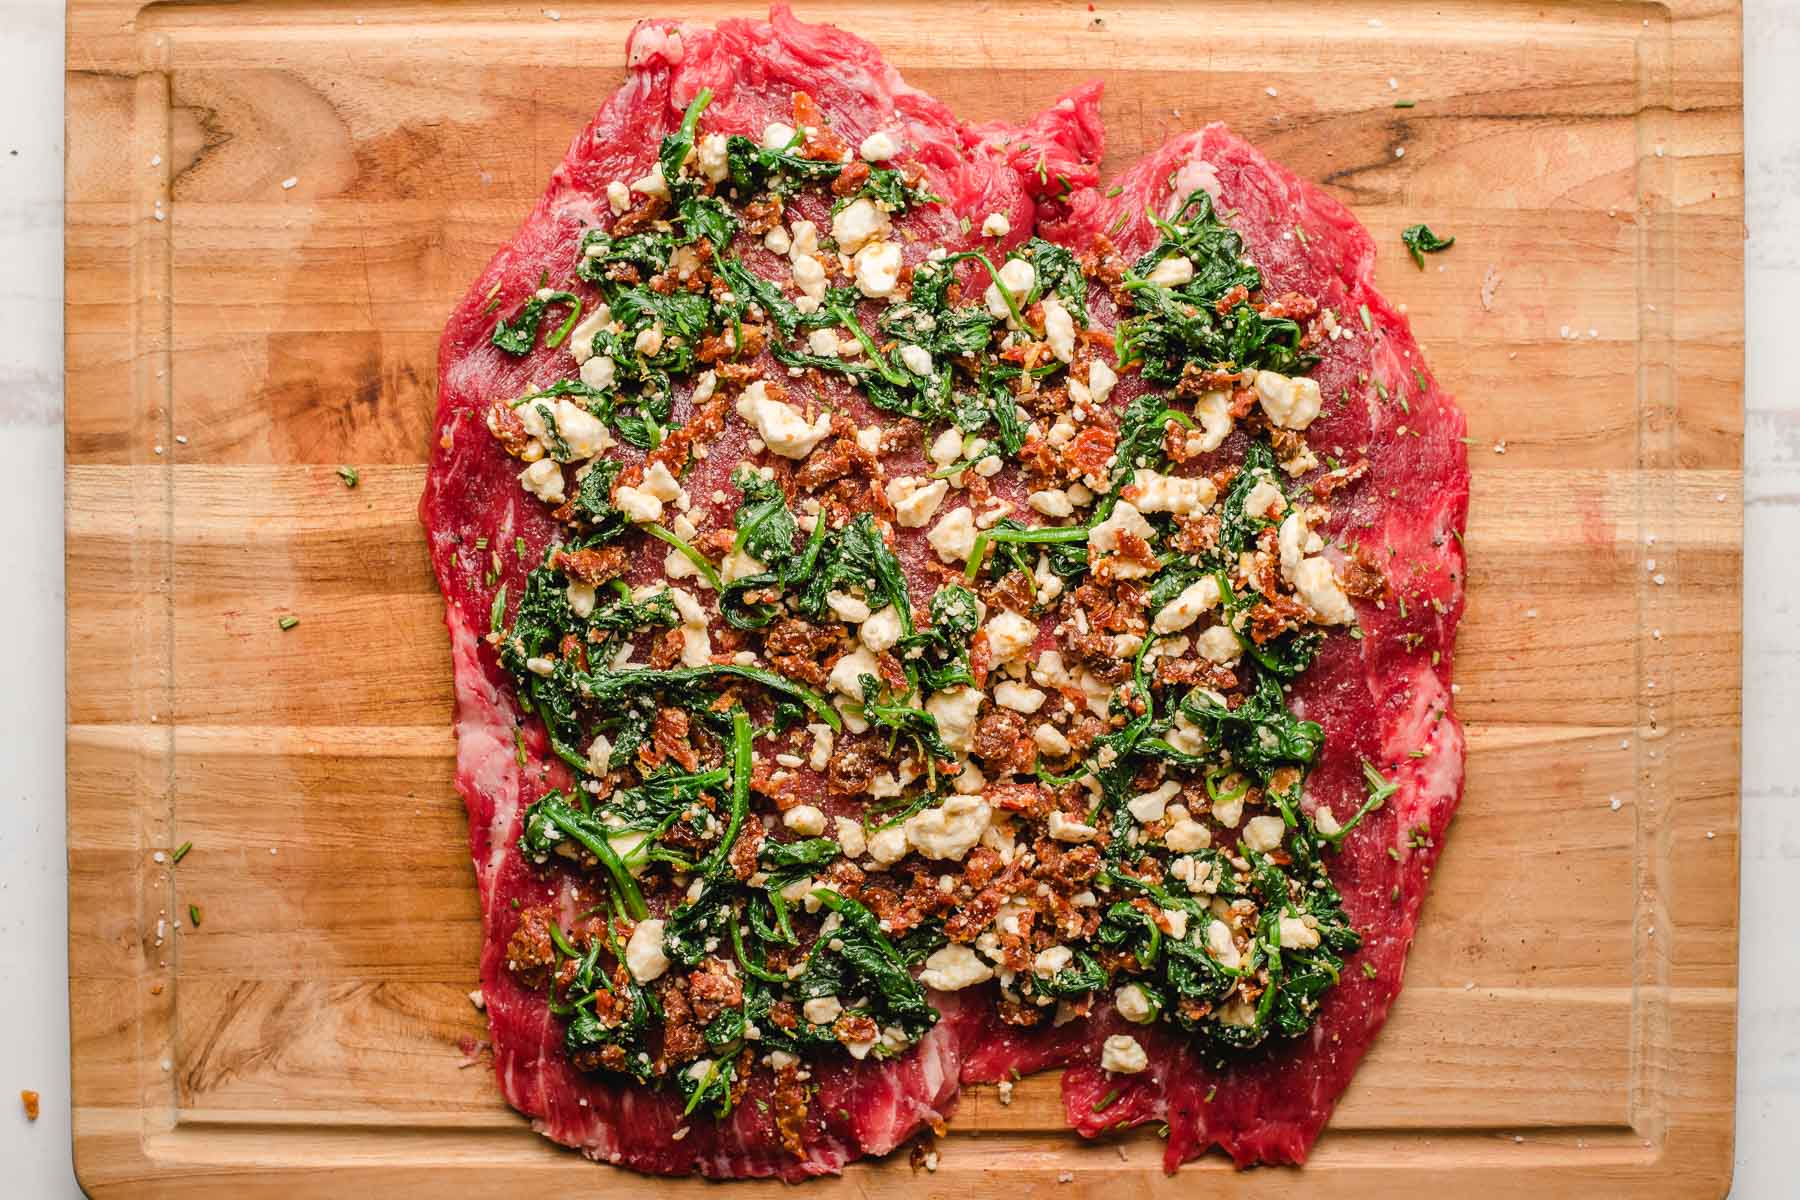 Flank steak butterflied and topped with sauteed spinach, feta, and sun dried tomatoes.